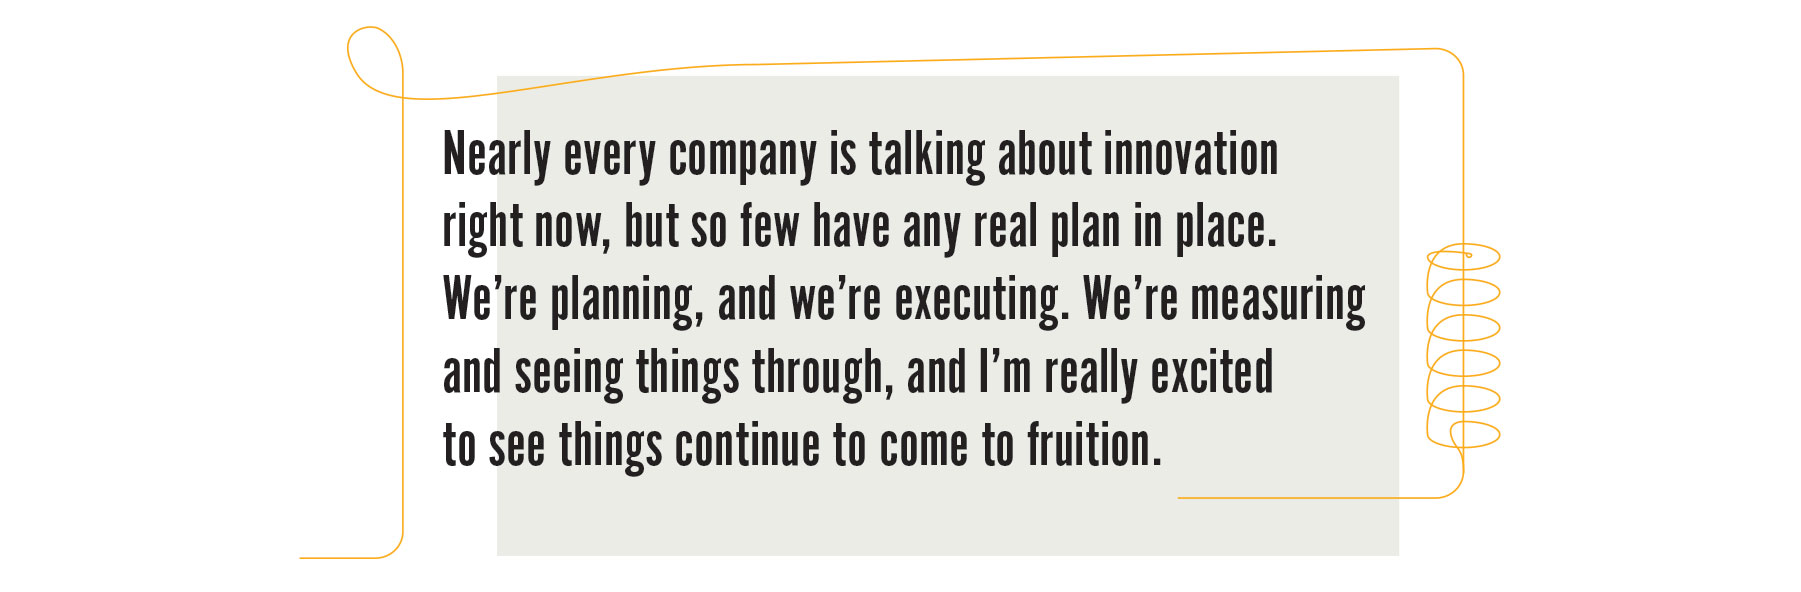 Nearly every company is talking about innovation right now, but so few have any real plan in place. We’re planning, and we’re executing. We’re measuring and seeing things through, and I’m really excited to see things continue to come to fruition.